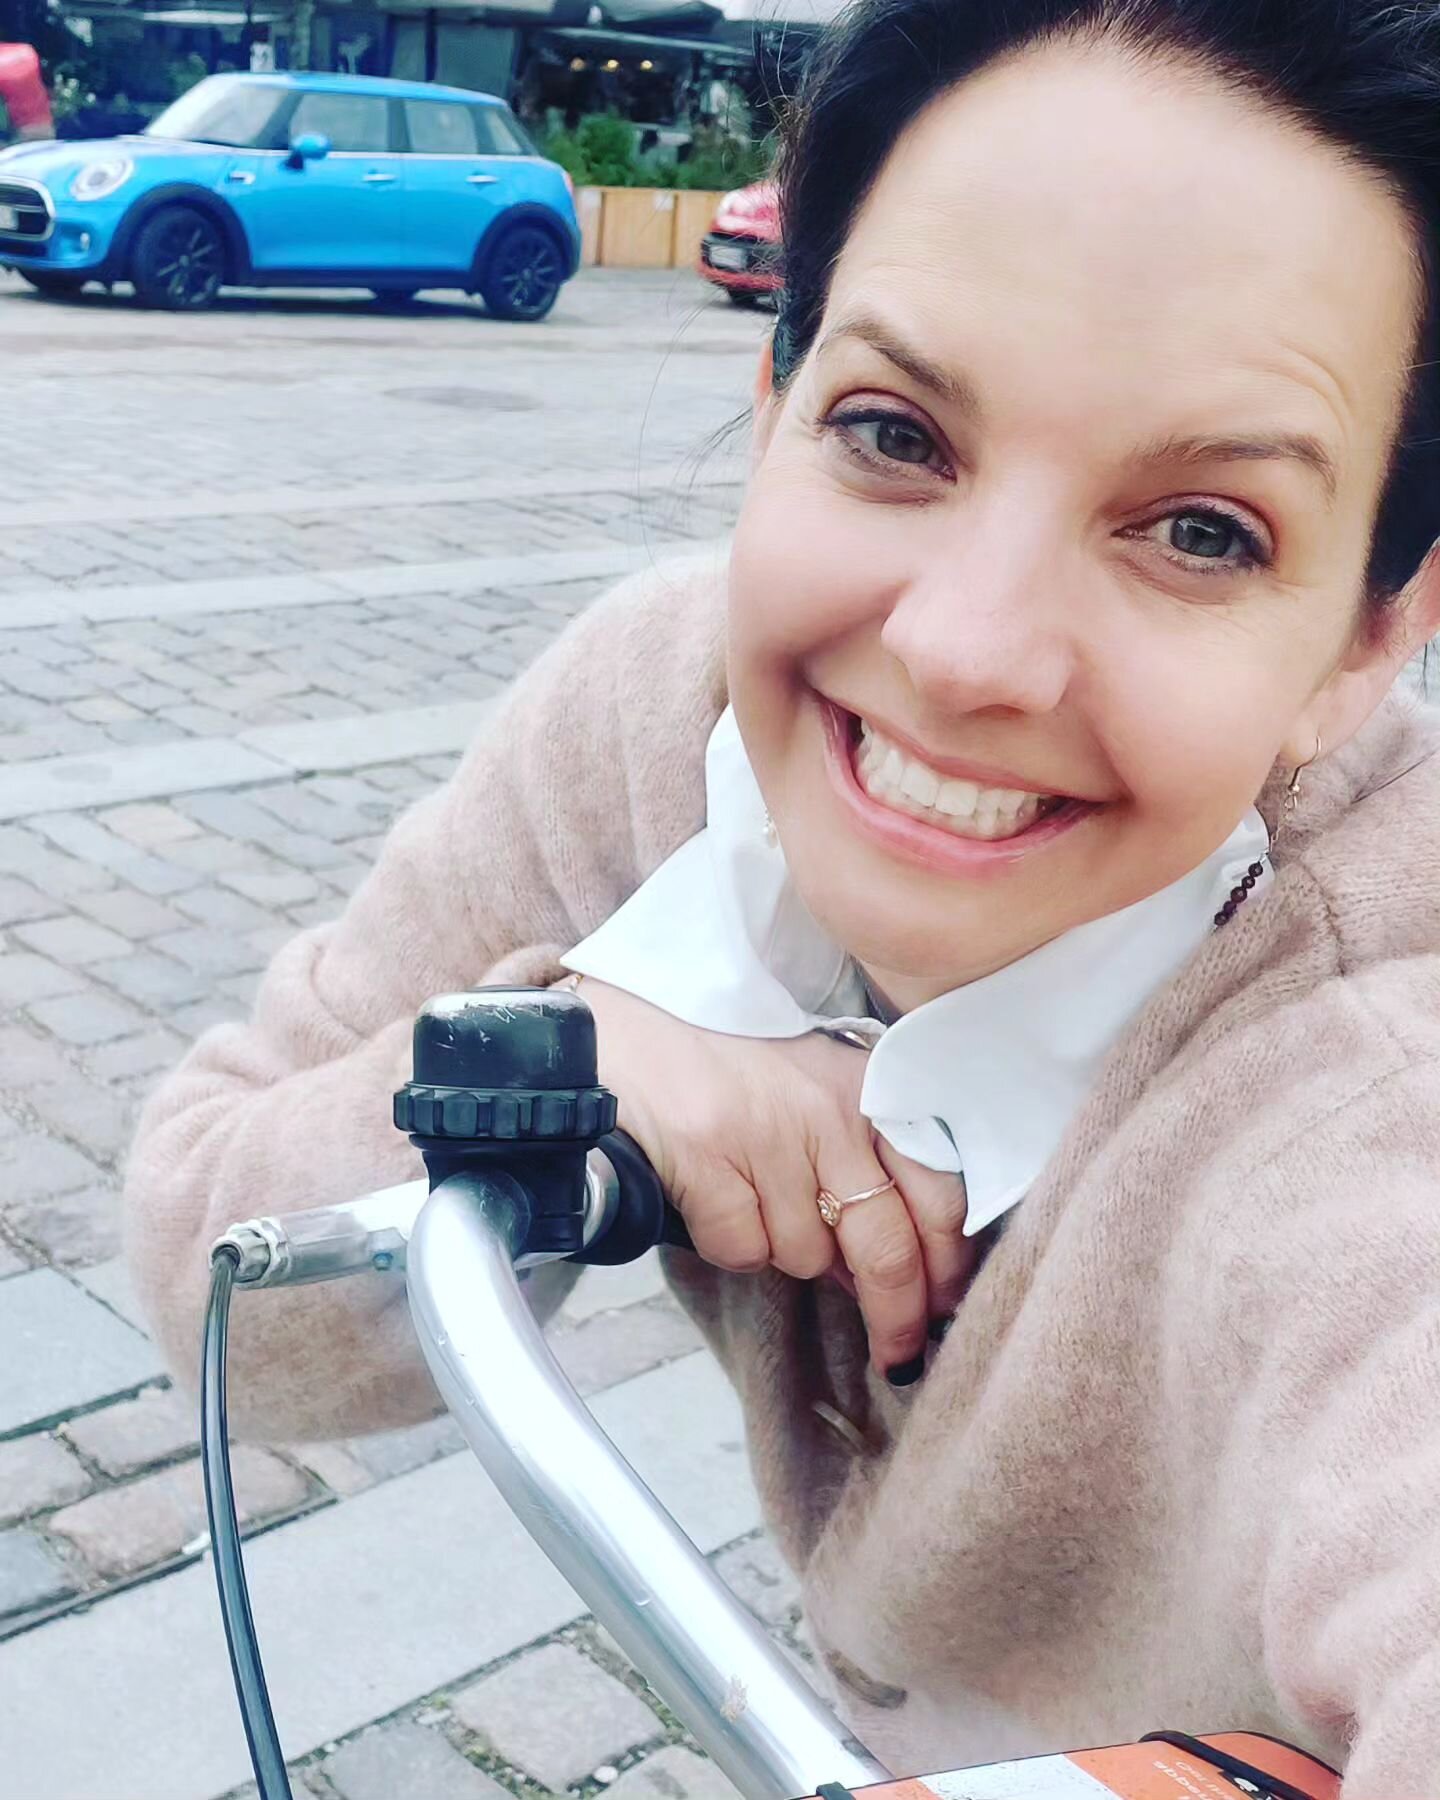 Happy 4th friends! May your day be sparkly and bright ! Kapow! 🌞 

#wheninrome #lovedenmark #copenhagan #biking #myride #independanceday #happy4thofjuly🇺🇸